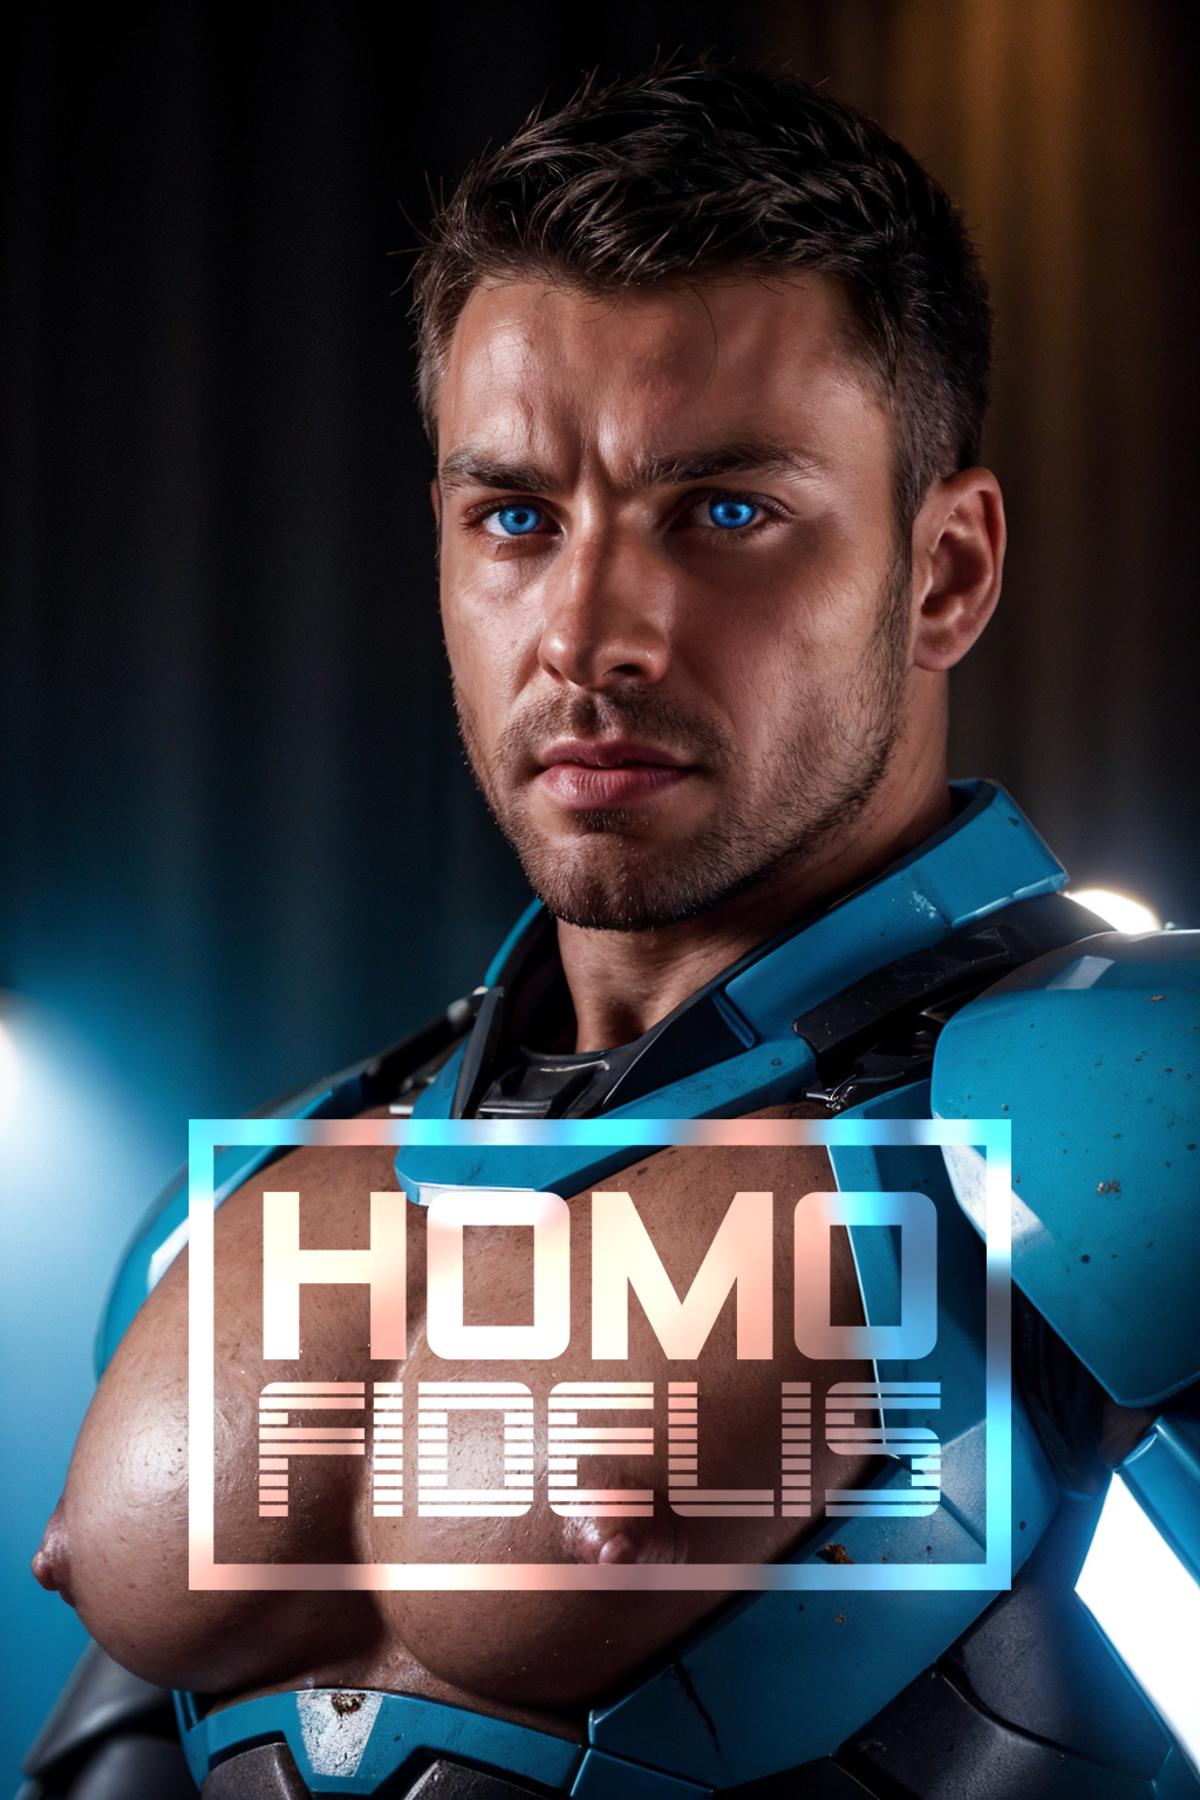 The muscular man with blue eyes and blue armor in the image.